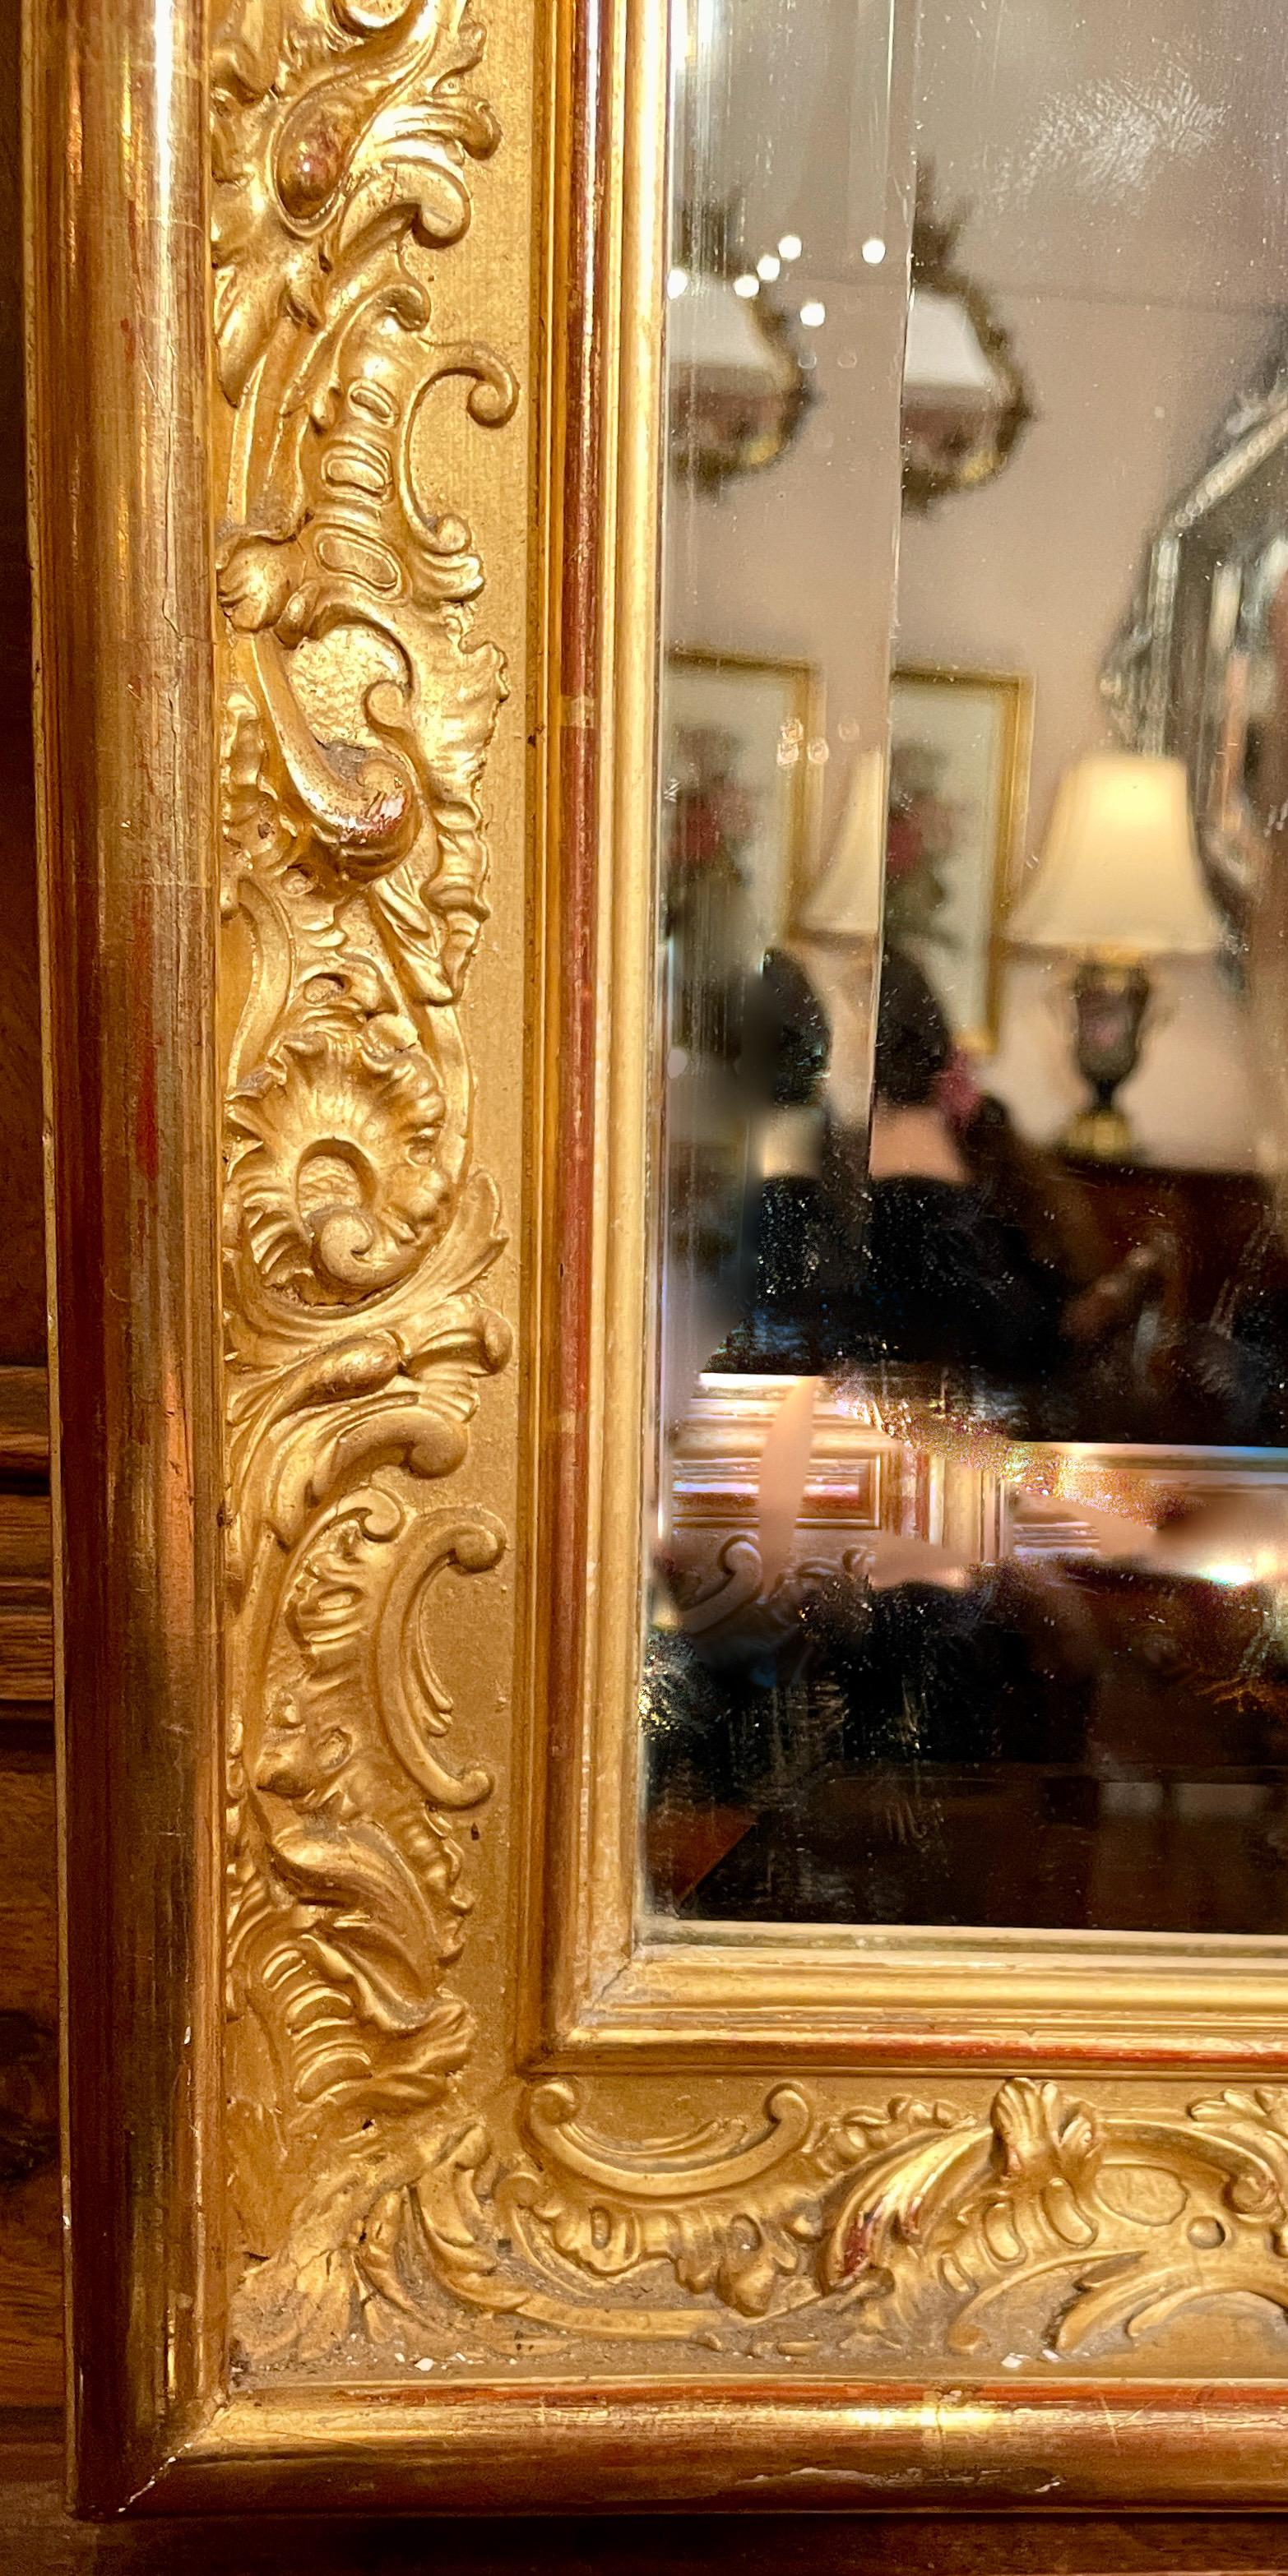 Antique French Napoleon III Gold Leaf Mirror with Beveling, Circa 1875-1885 For Sale 1